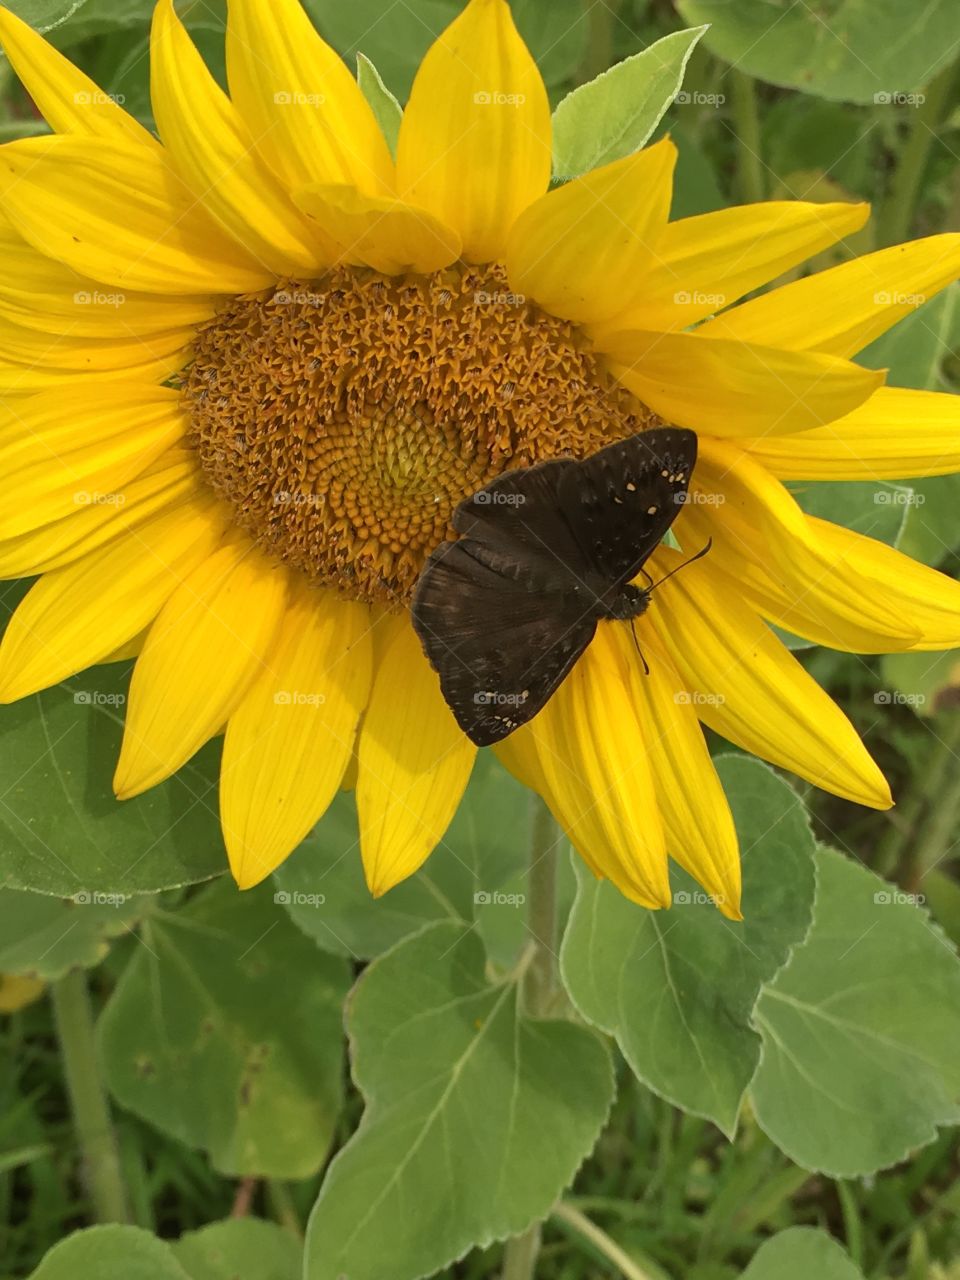 Sunflower and butterfly 